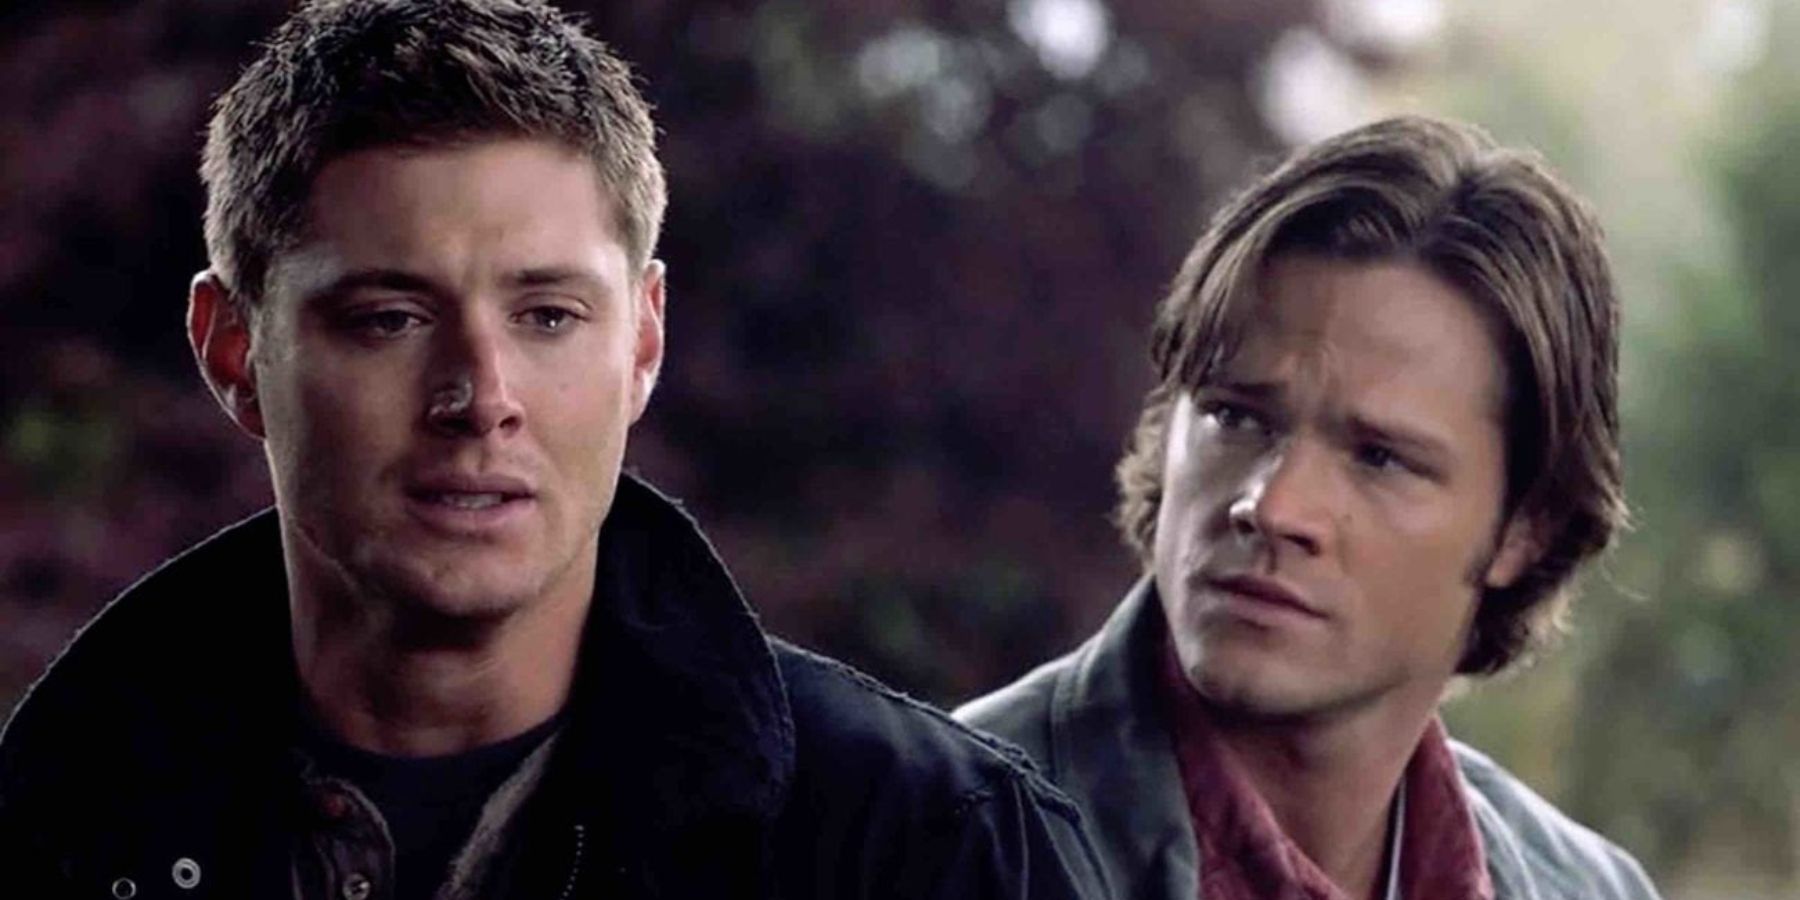 Dean and Sam looking upset and serious on Supernatural